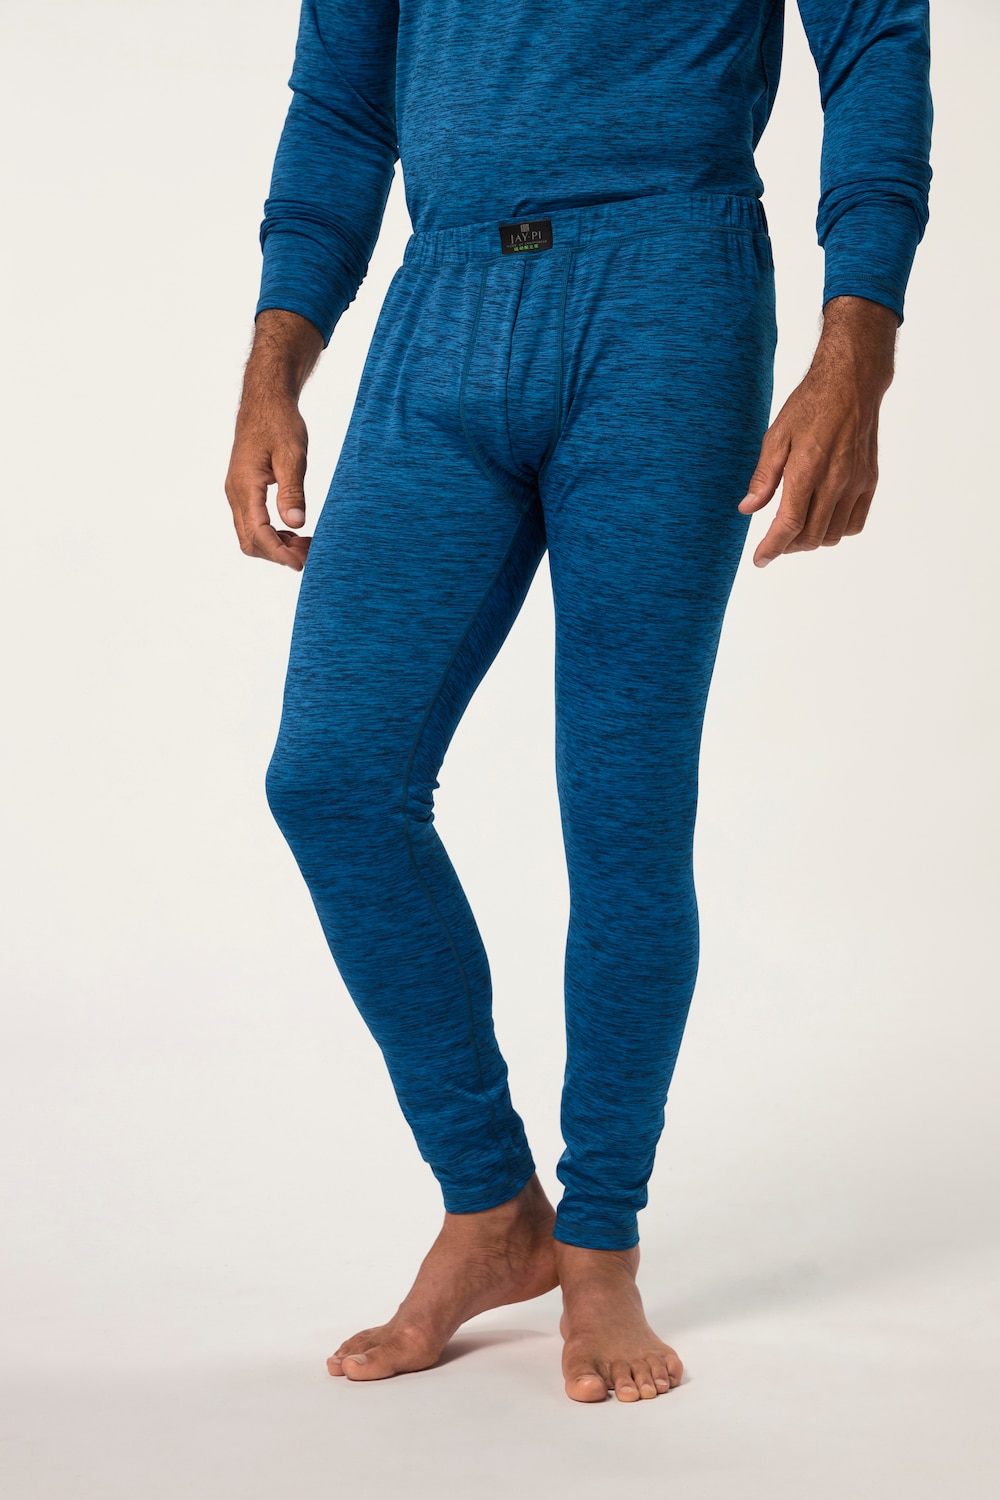 Grote Maten JAY-PI skibroekmale, turquoise, Maat: L, Polyester/Elastaan, JAY-PI